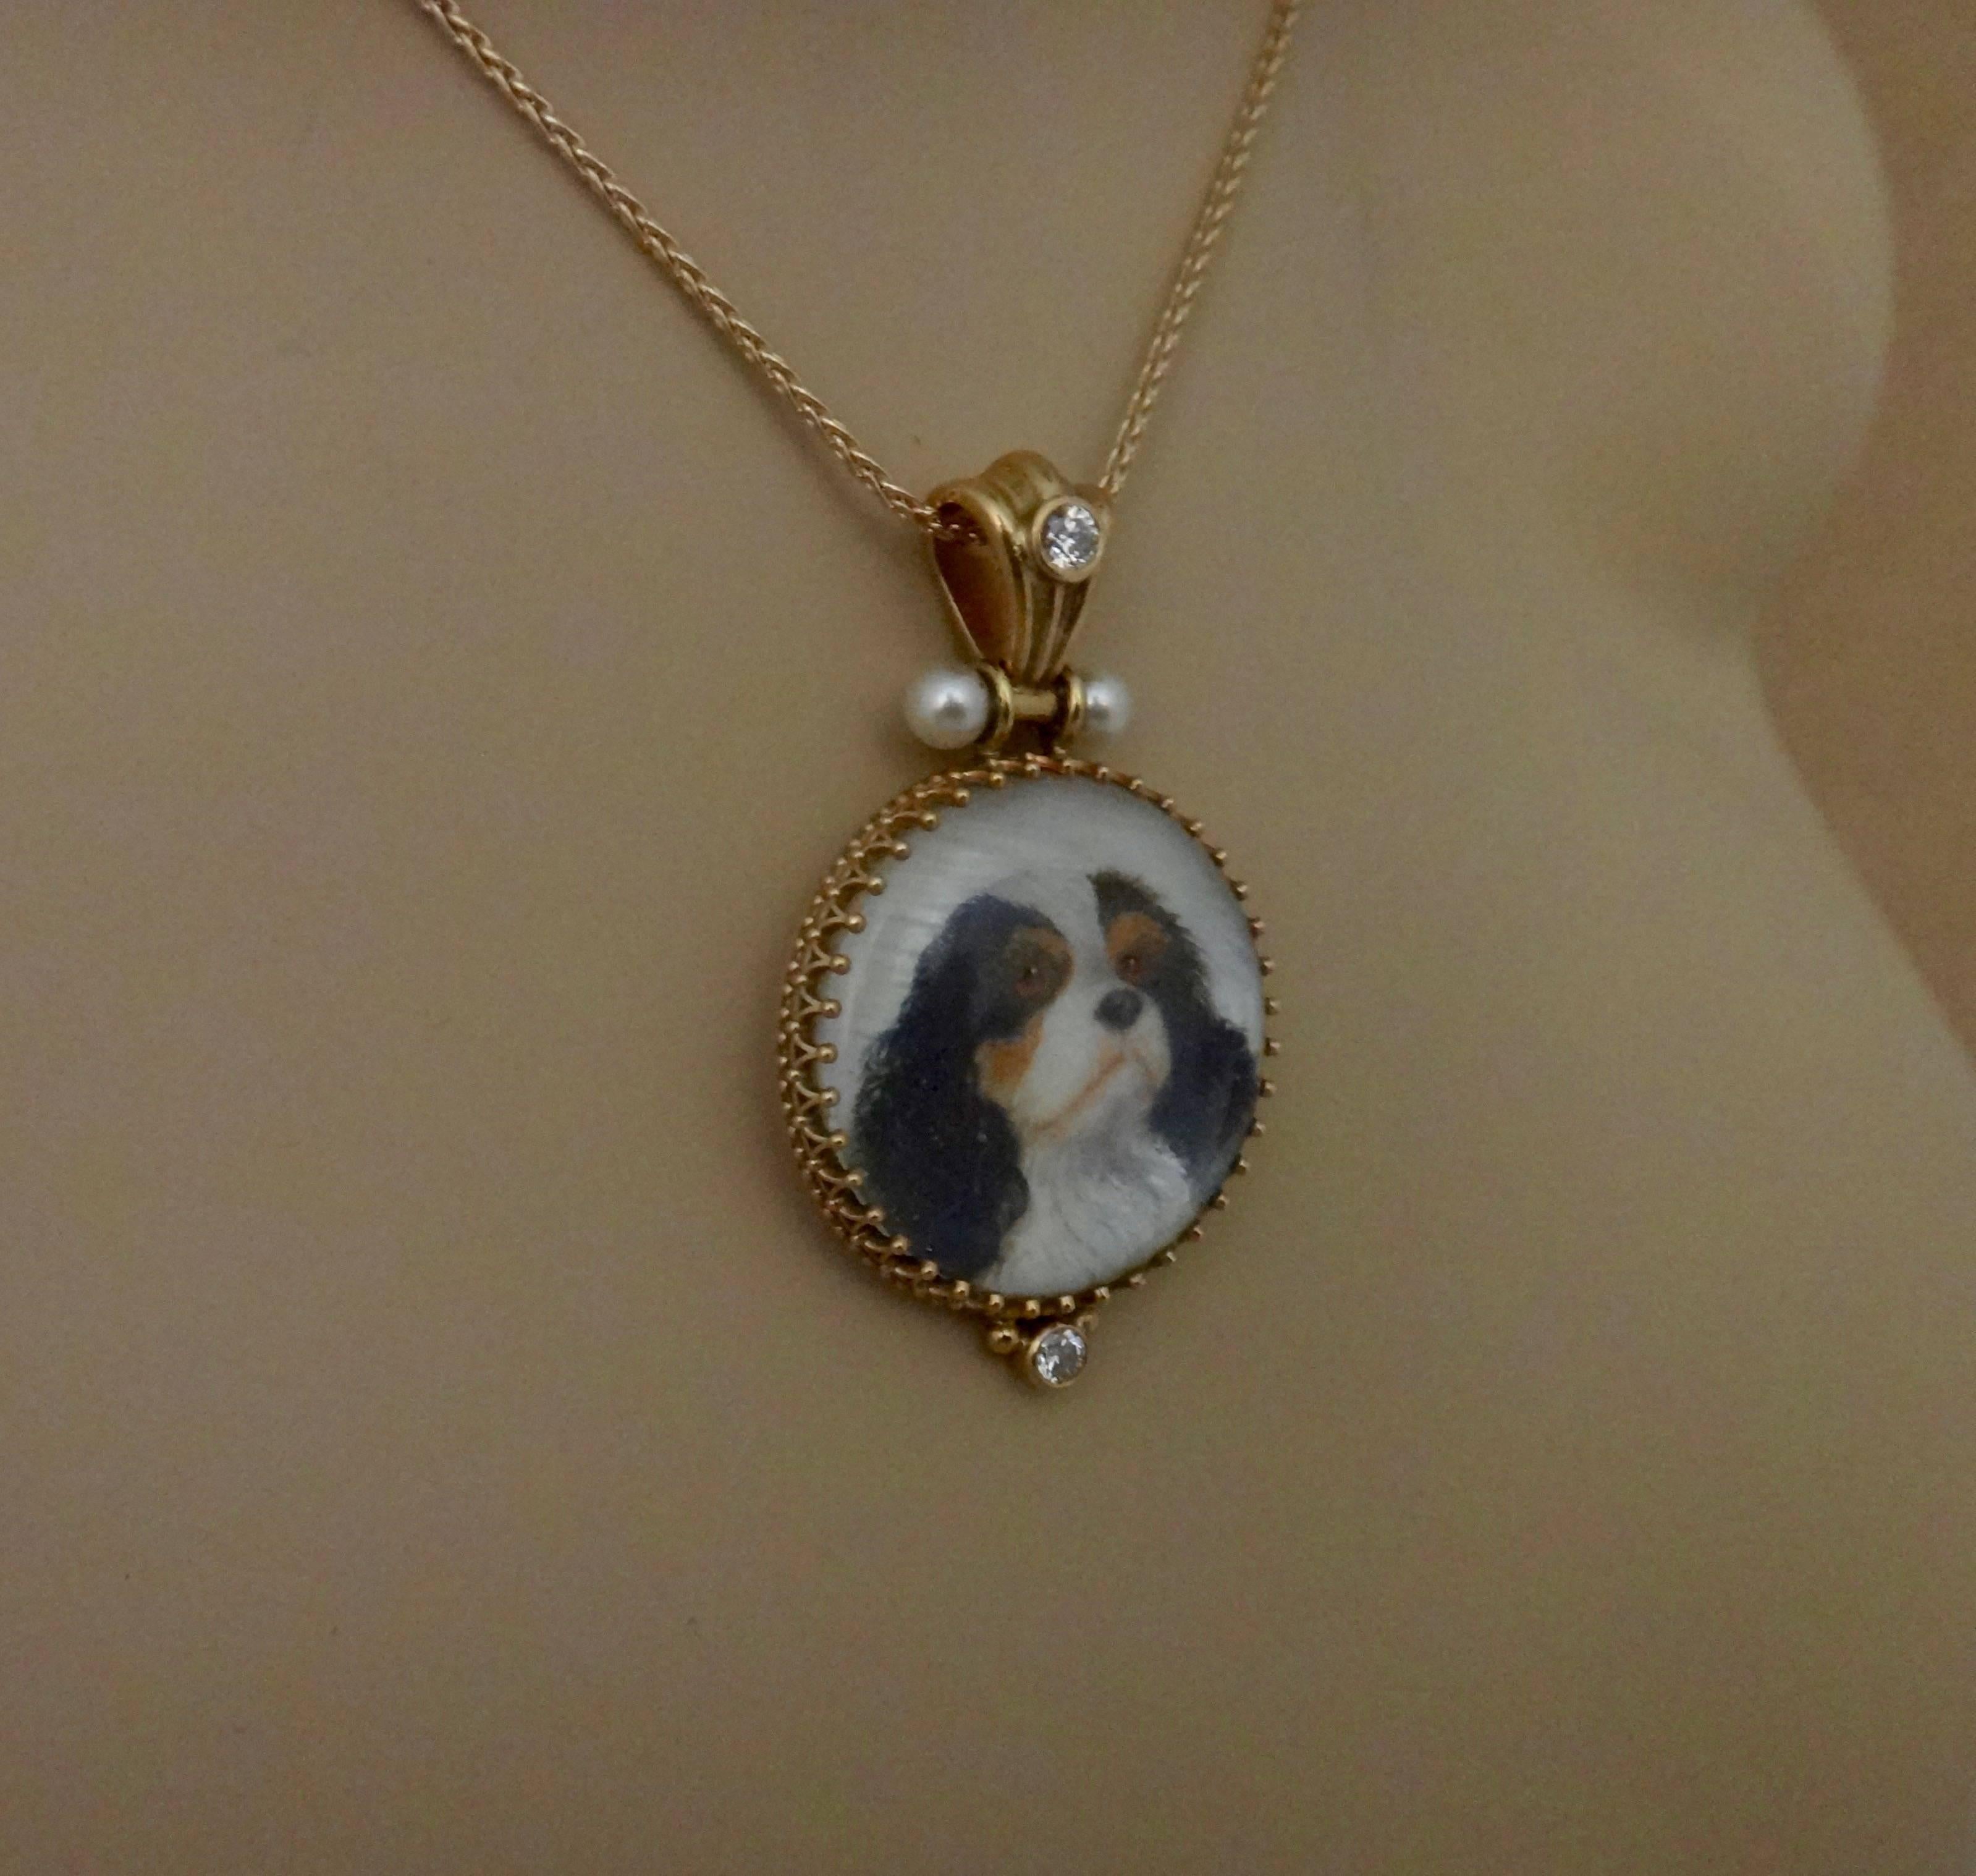 A miniature portrait of a King Charles Spaniel is featured in this one-of-a-kind pendant.  The oil on mother-of-pearl painting is by artist Georgina Love.  The painting is protected by a rock crystal lenses and is set in a filigree frame decorated